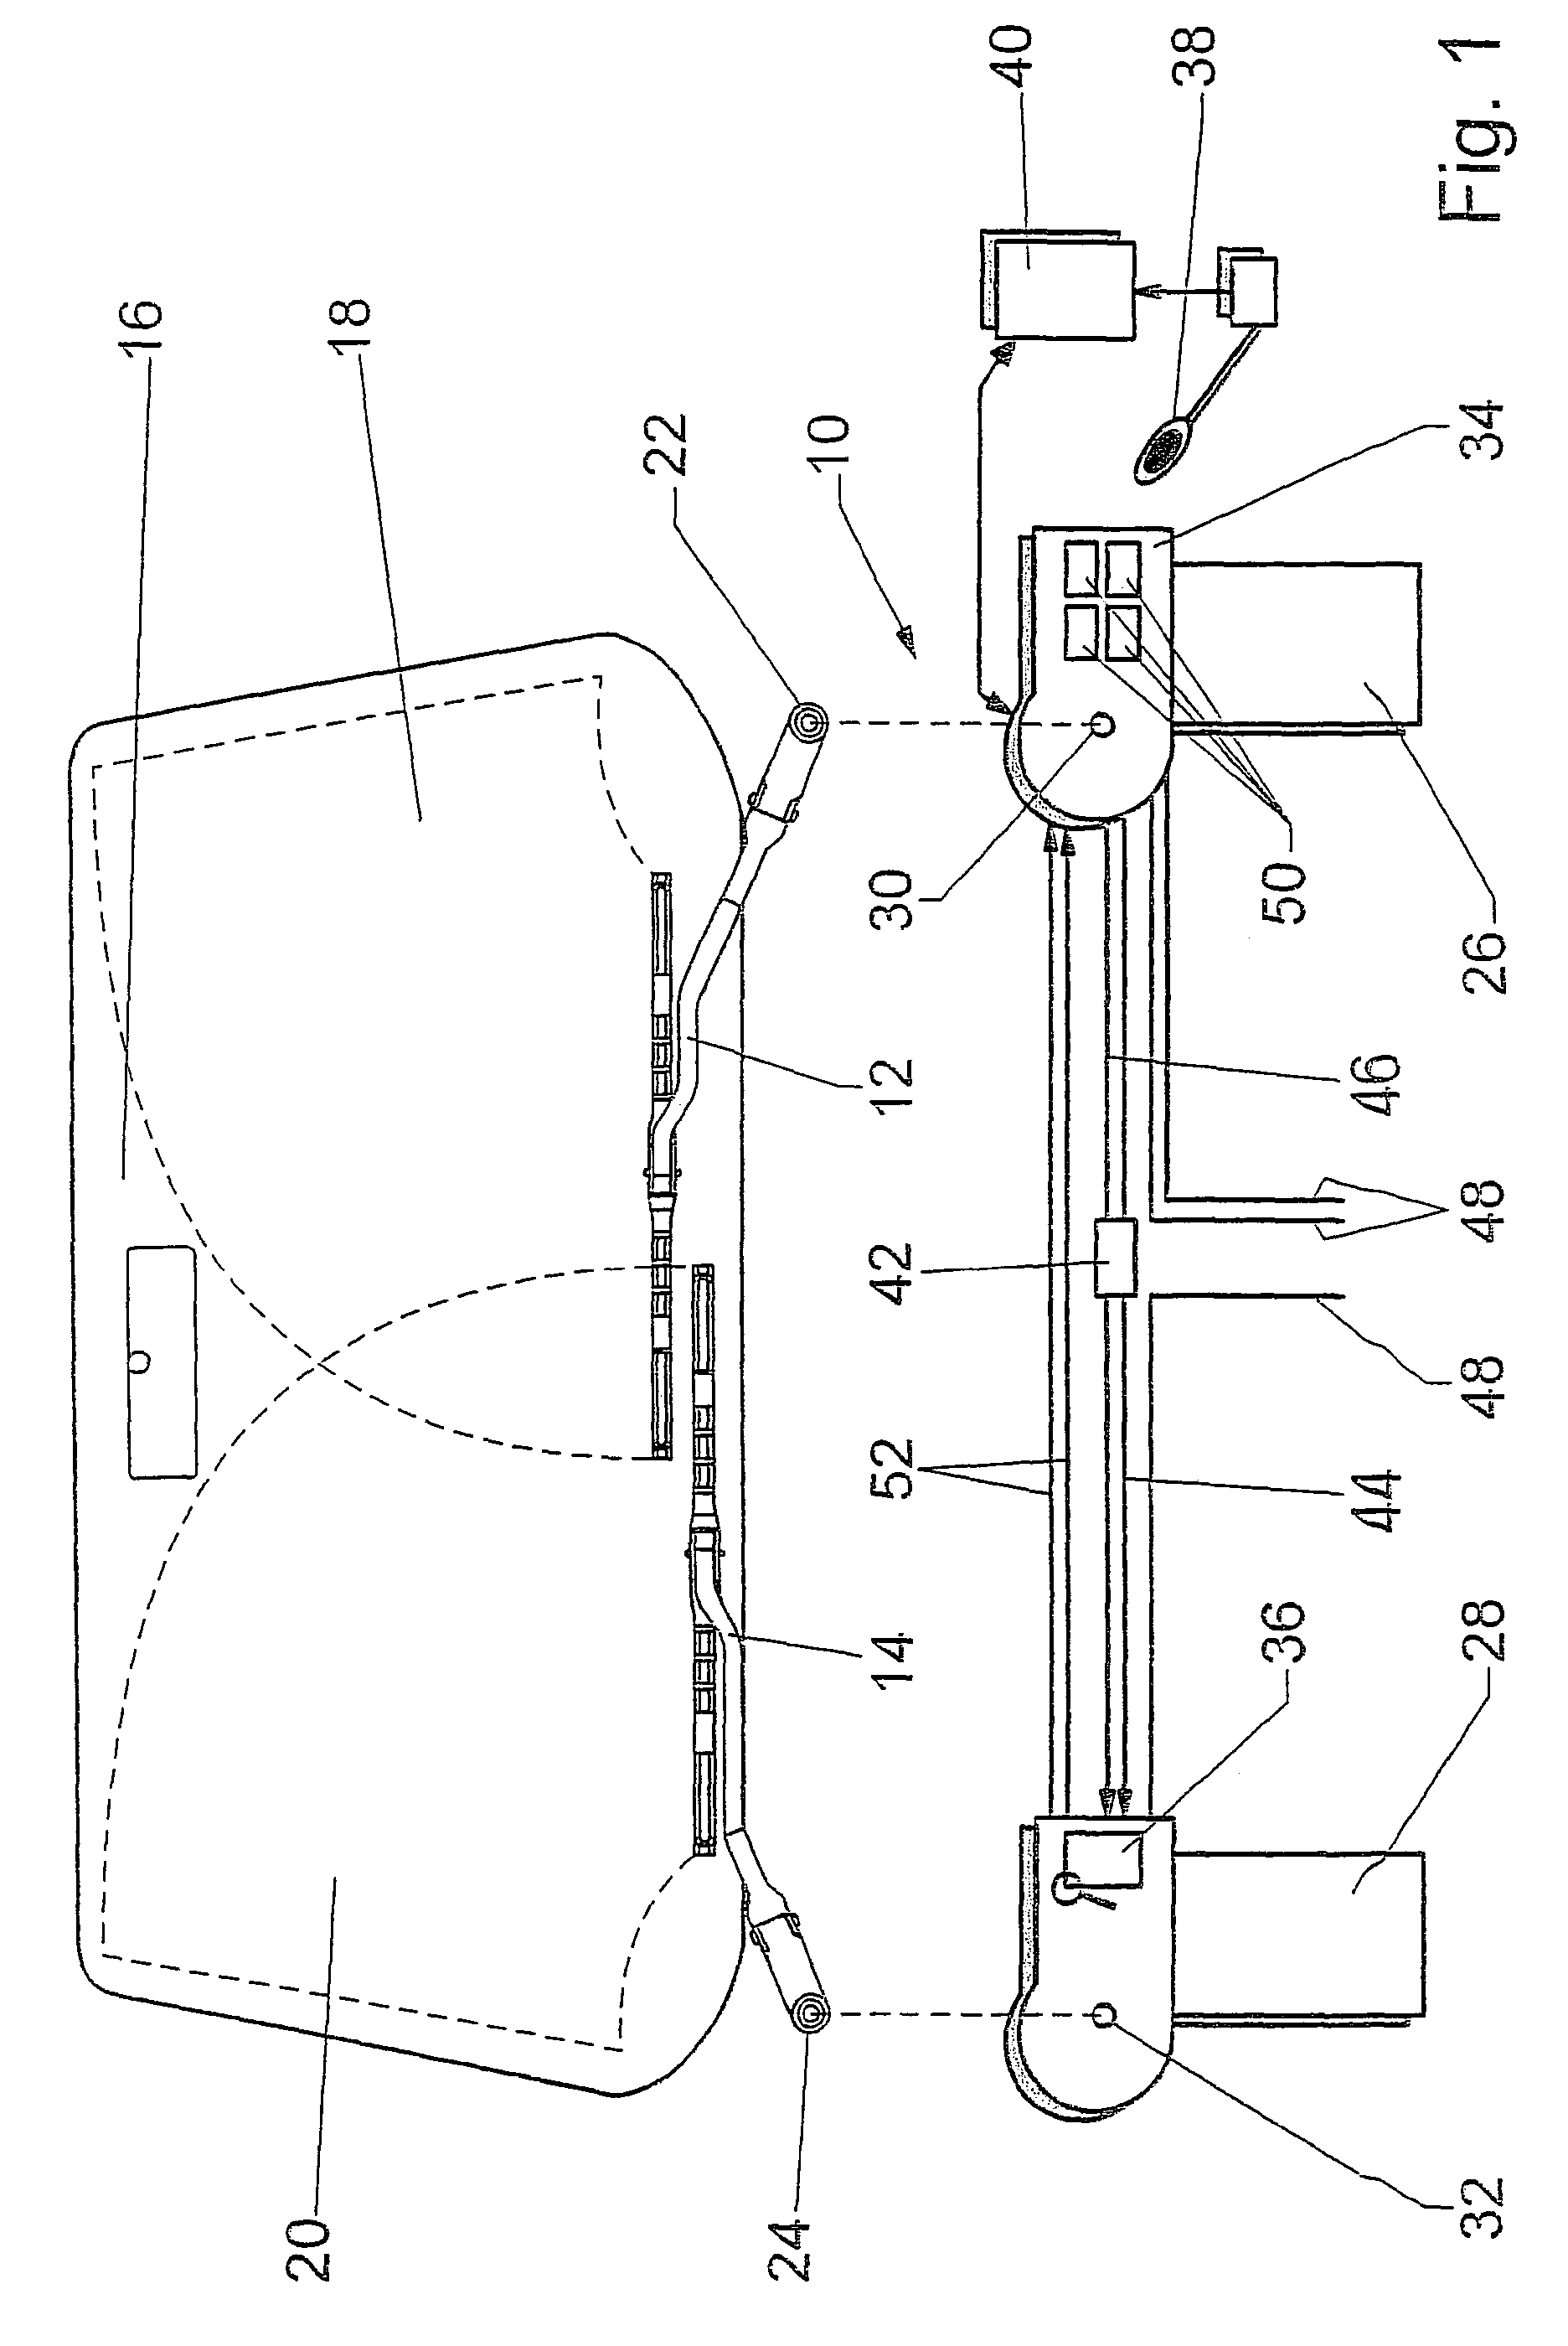 Wiper system using two wipers